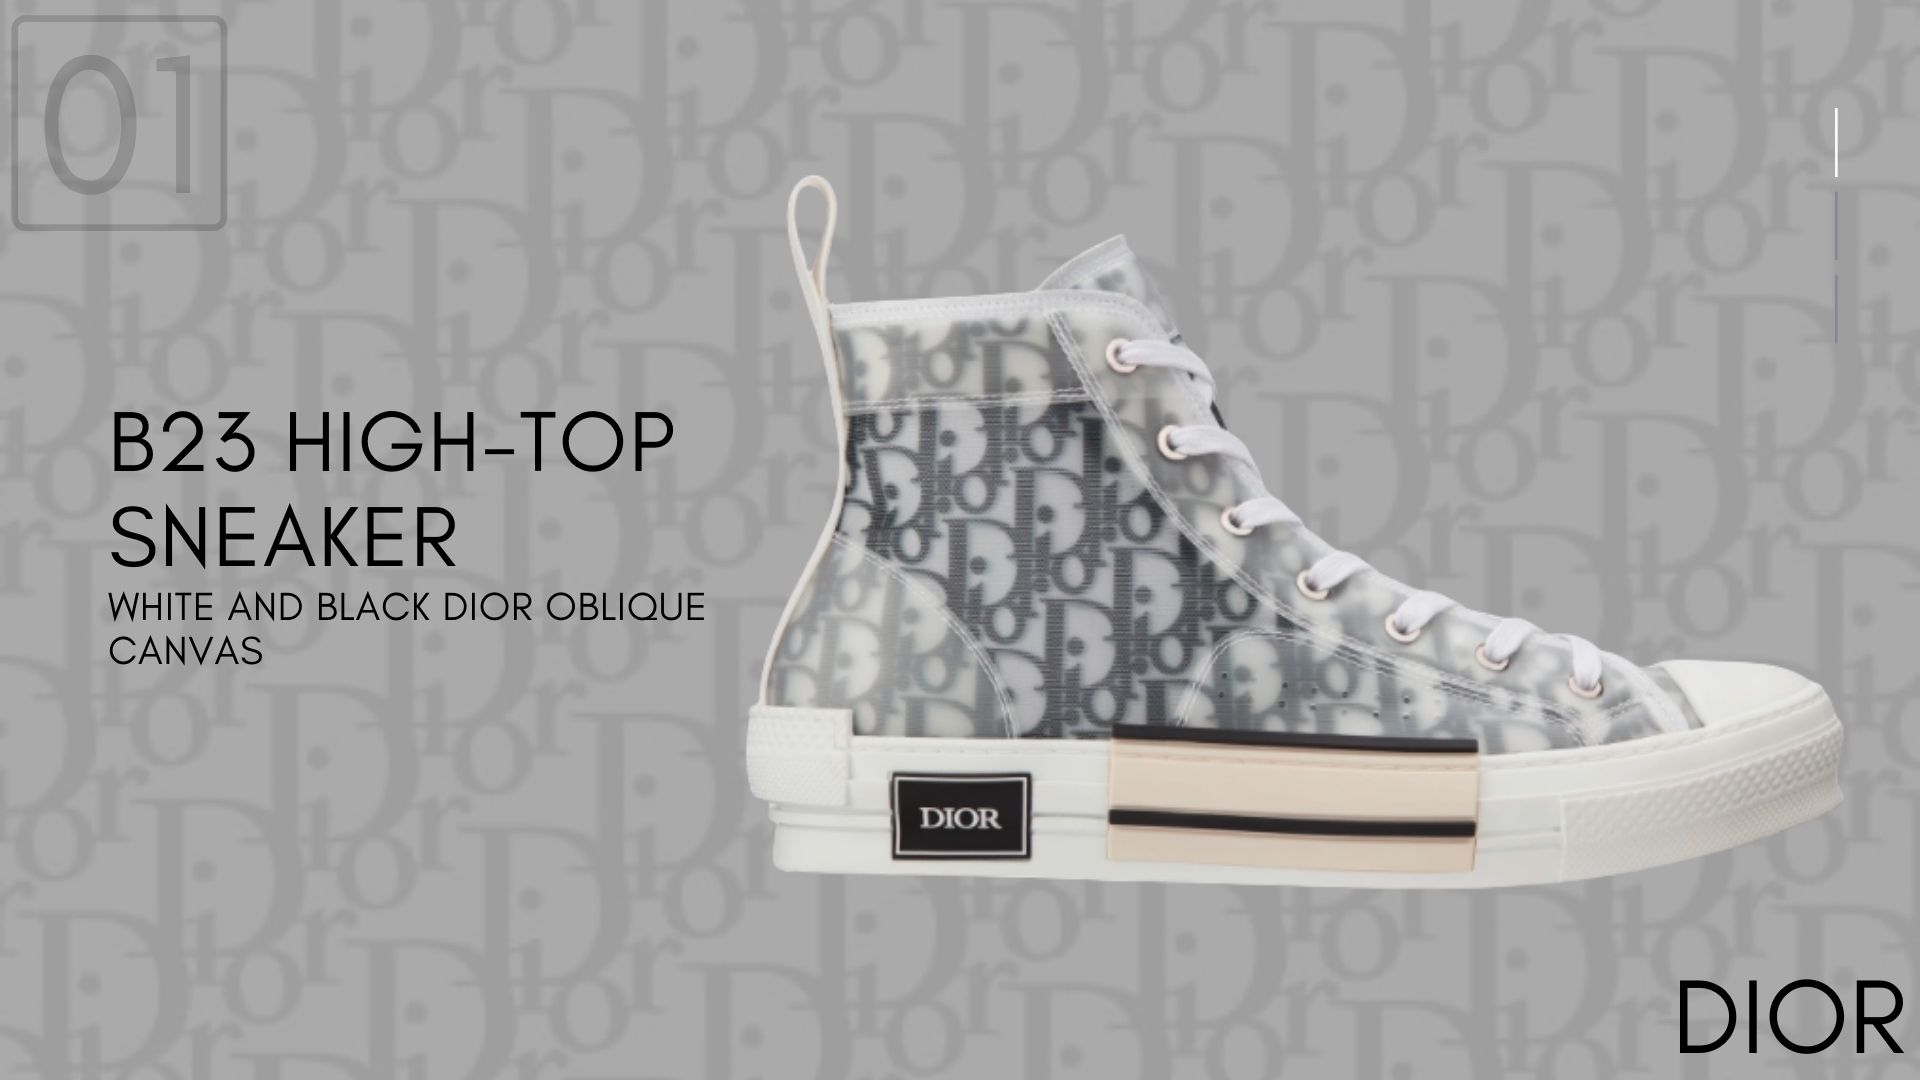 B23 HIGH-TOP White and Black Dior Oblique Canvas - Dior Sneakers-รองเท้าดิออร์-10 dior sneakers-dior 10 sneakers